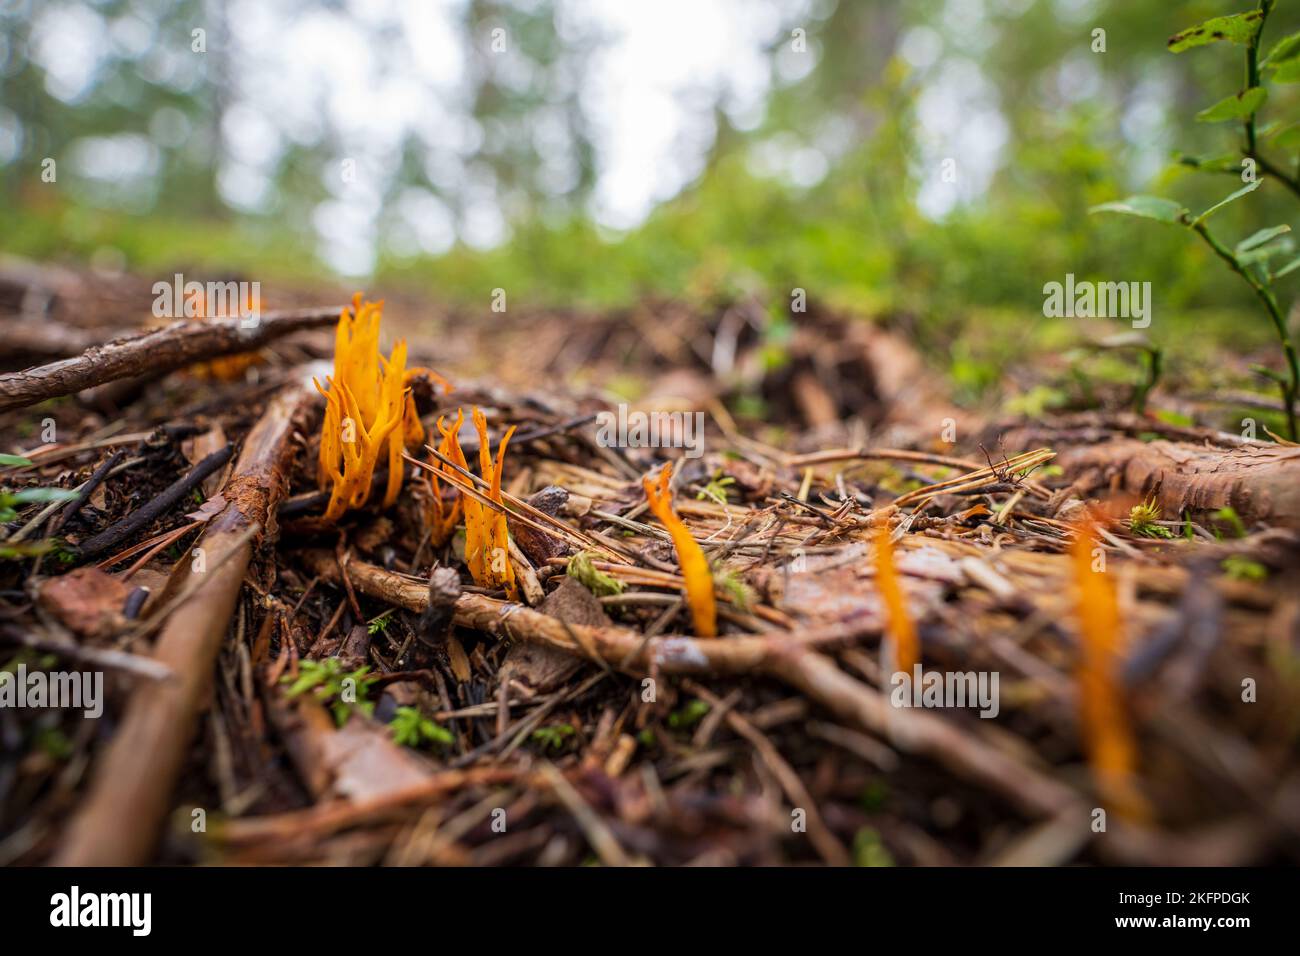 A closeup shot of yellow-tipped coral fungus growing on the forest ground - Ramaria formosa Stock Photo